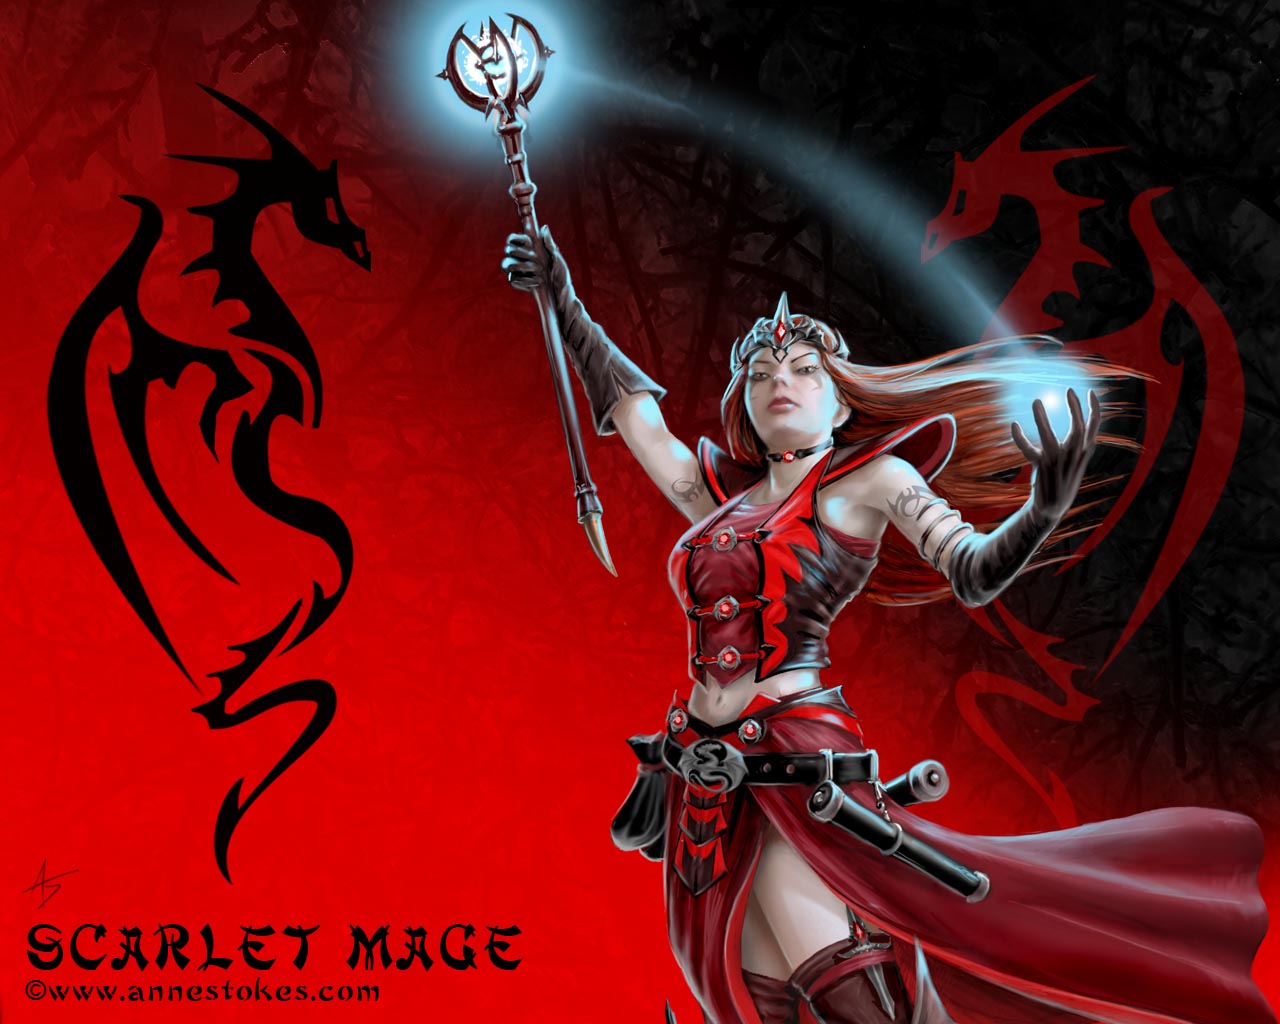 Scarlet Mage Wallpaper By Ironshod